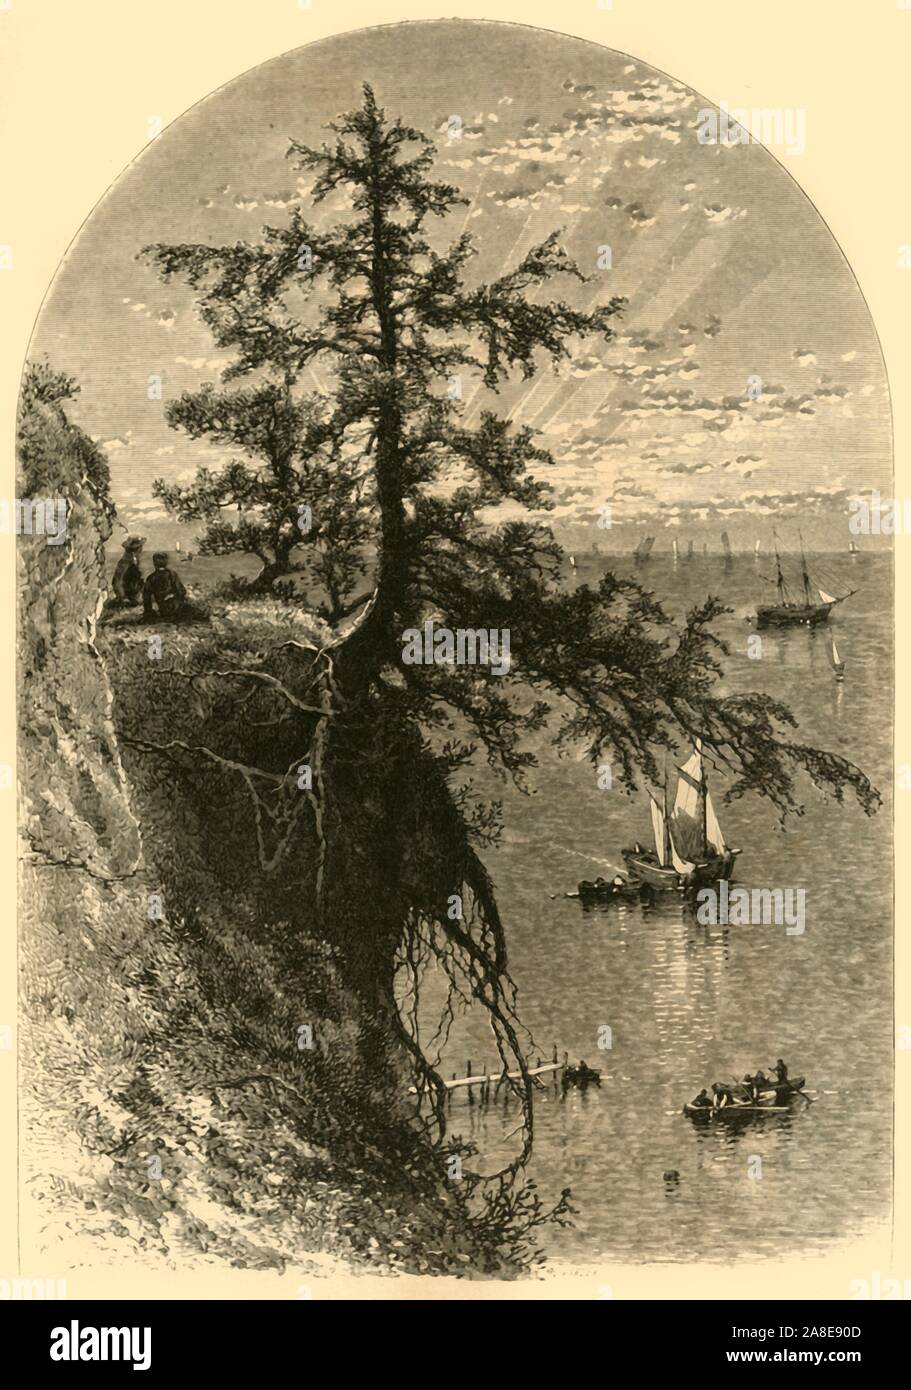 'Lake Erie, from Bluff, Mouth of Rocky River', 1872. Exposed tree-roots on a headland overlooking Lake Erie, near Cleveland, Ohio, USA. From &quot;Picturesque America; or, The Land We Live In, A Delineation by Pen and Pencil of the Mountains, Rivers, Lakes...with Illustrations on Steel and Wood by Eminent American Artists&quot; Vol. I, edited by William Cullen Bryant. [D. Appleton and Company, New York, 1872] Stock Photo